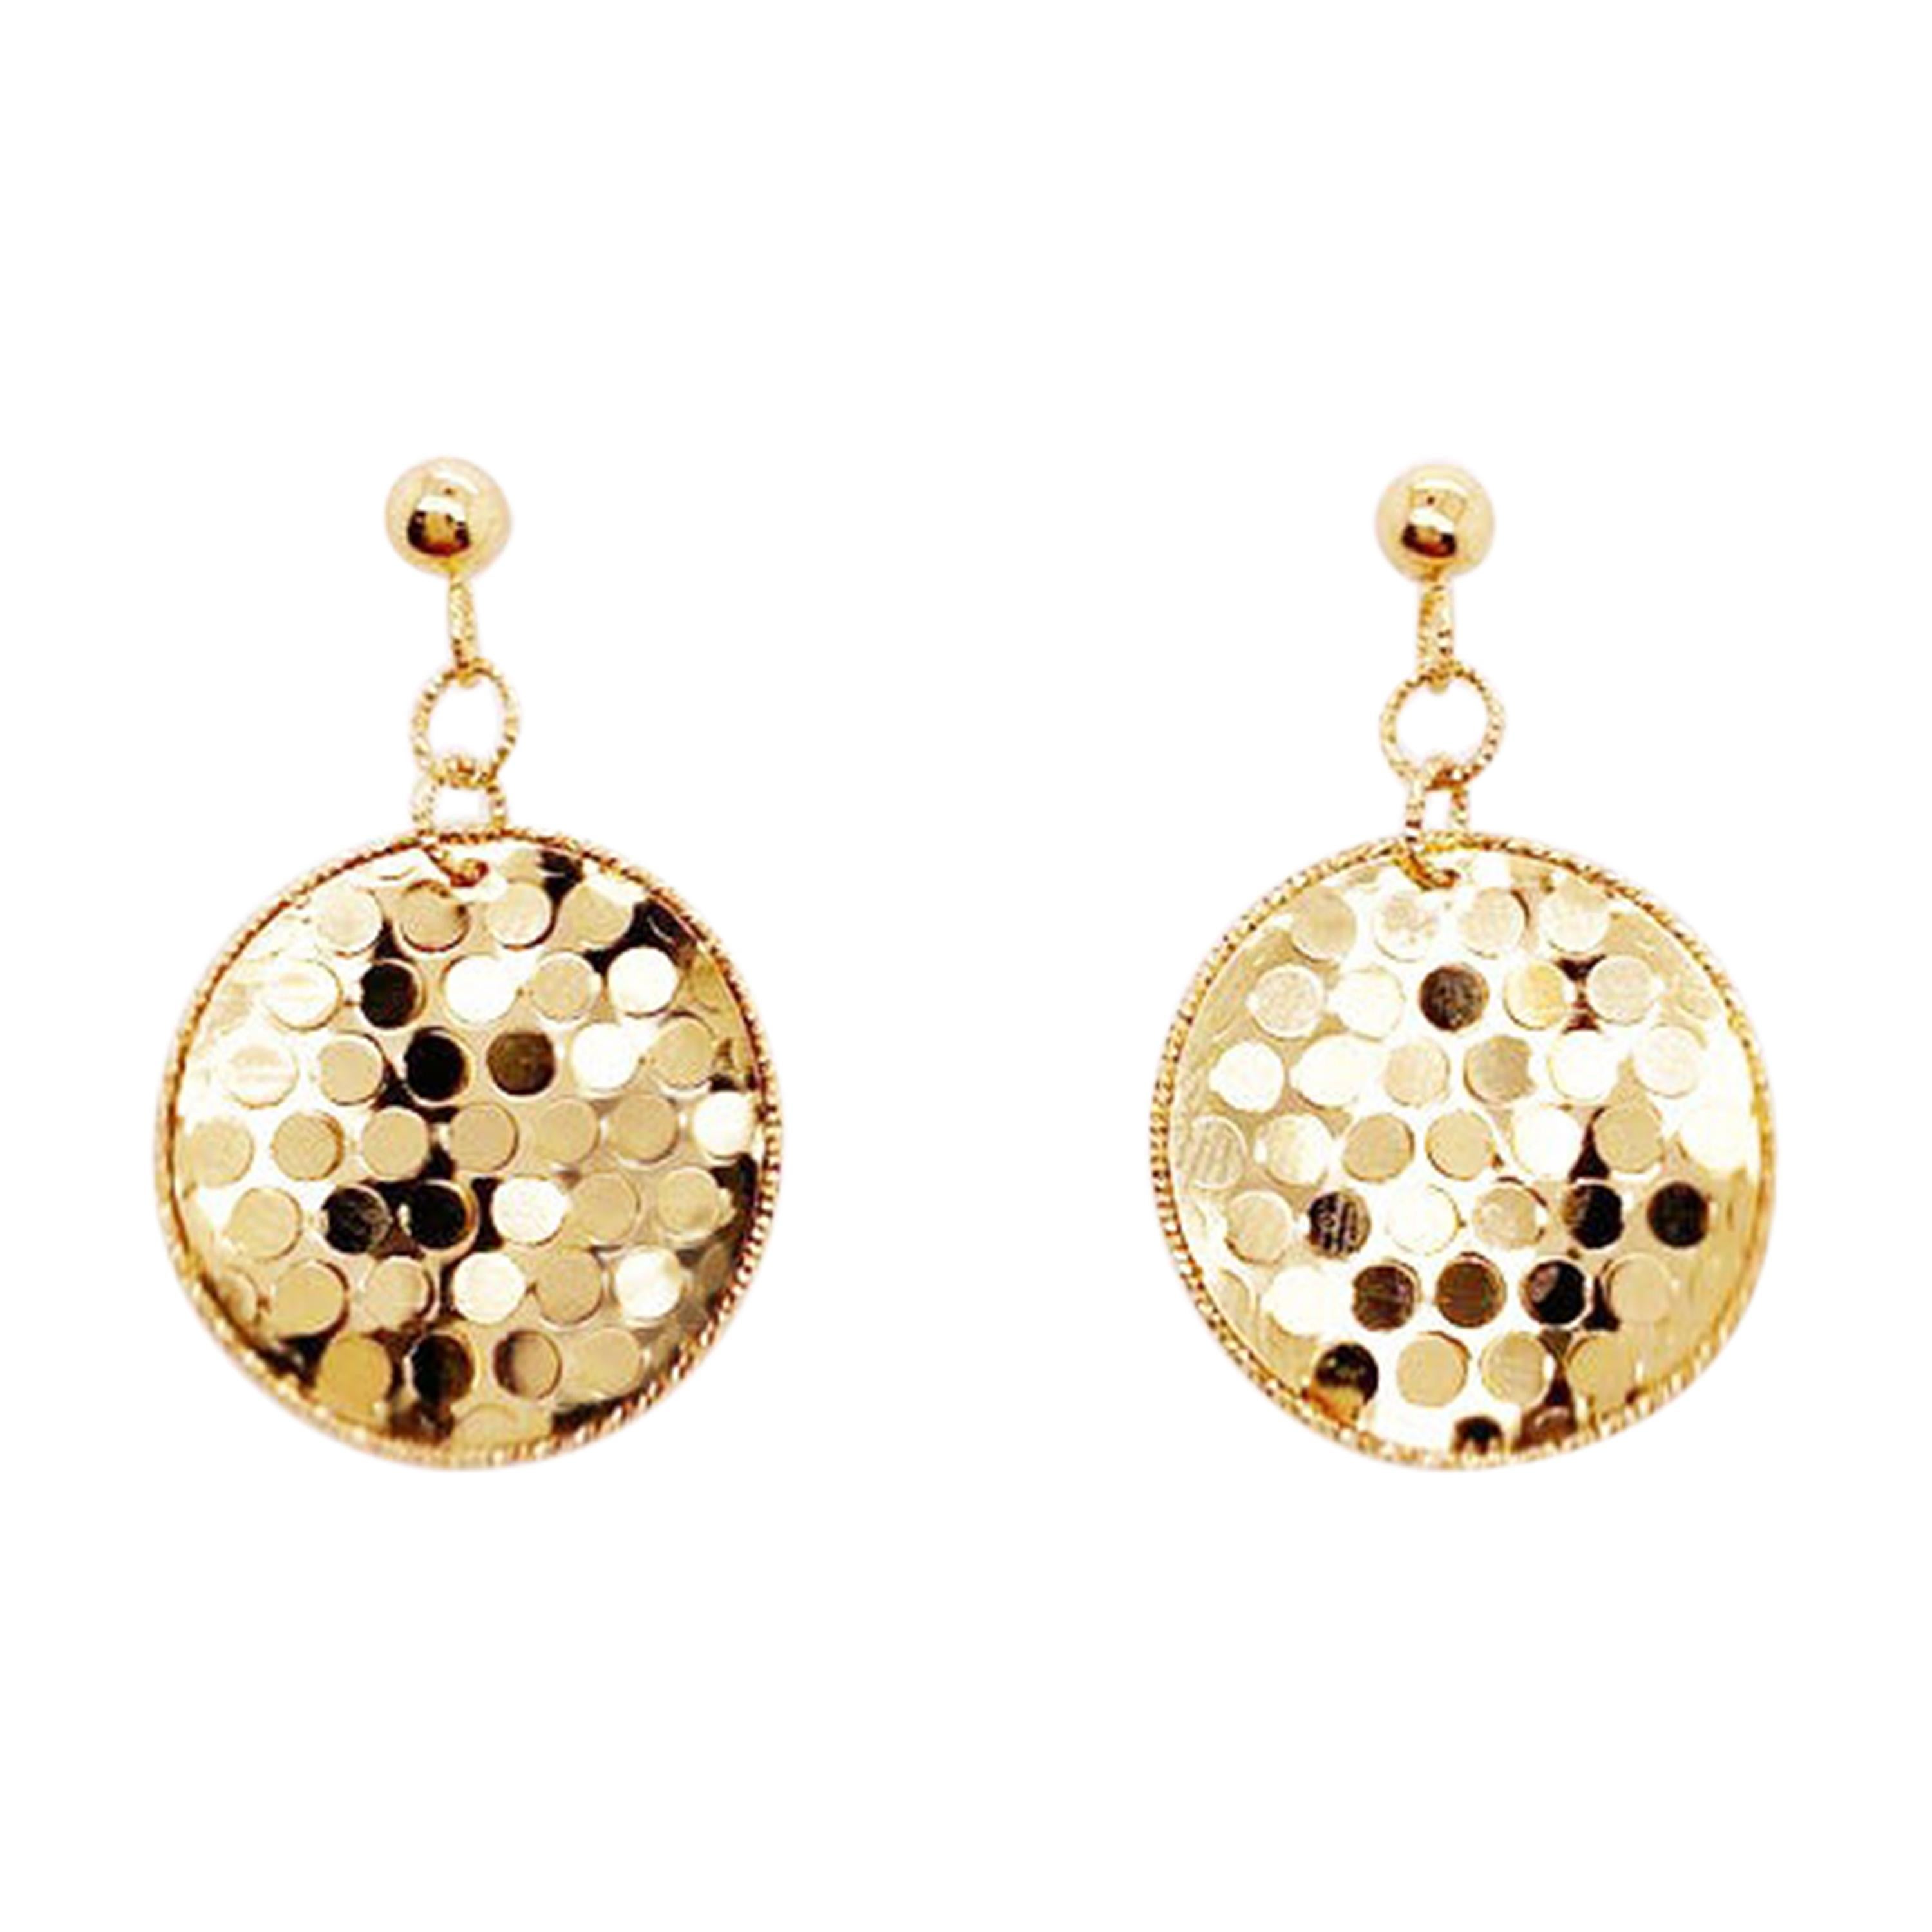 Gold Confetti Disk Earrings, 14k Yellow Gold Shimmer Reflective Earring Dangles For Sale